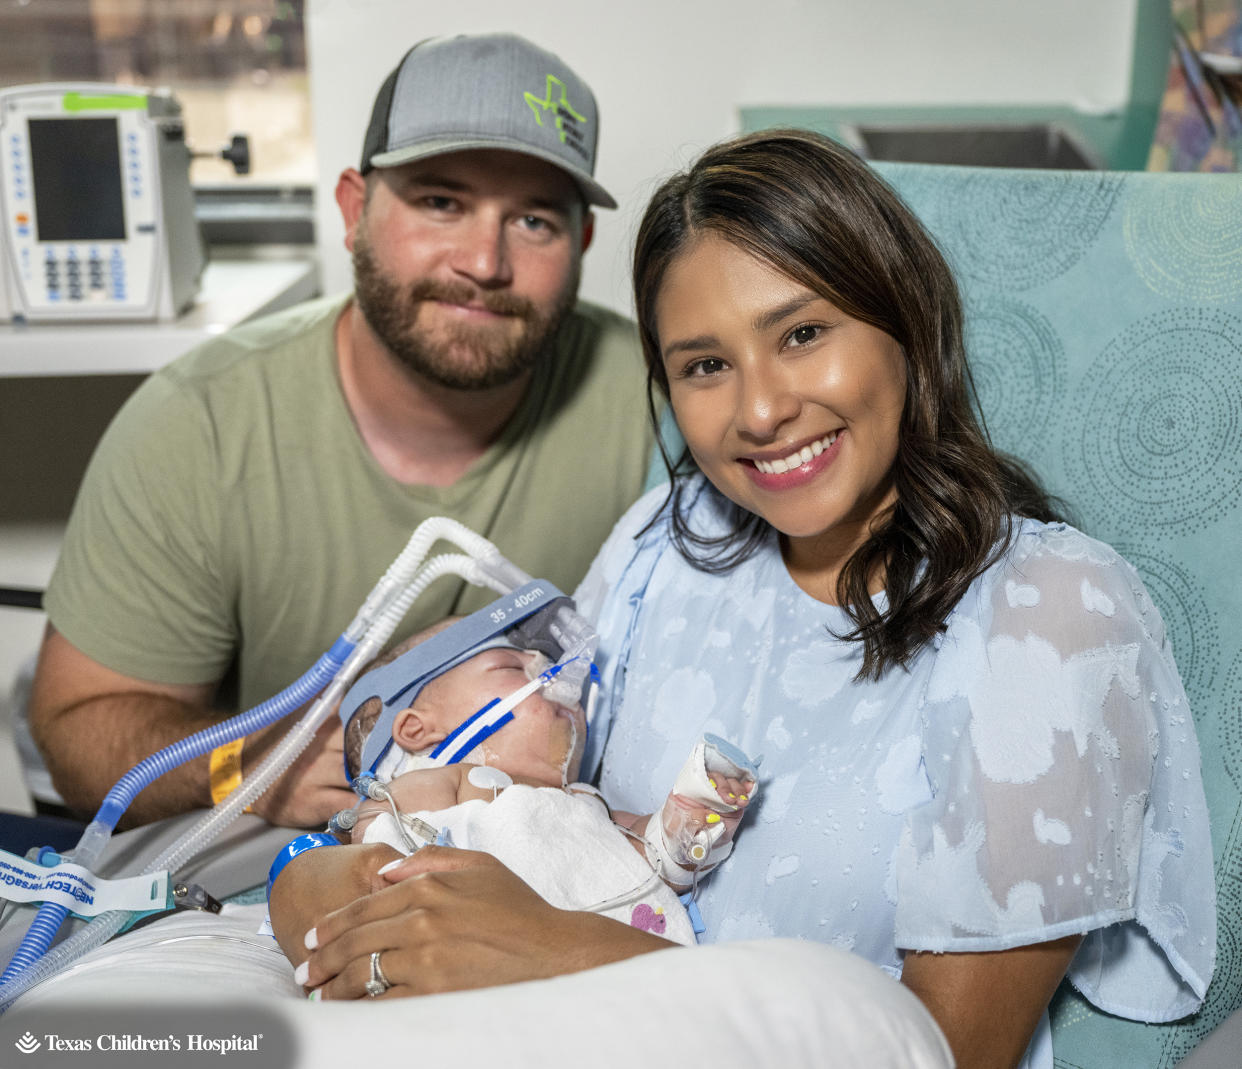 Sandy Fuller said holding her babies on their back after their separation surgery made her feel 'grateful.' (Courtesy Texas Children's Hospital )